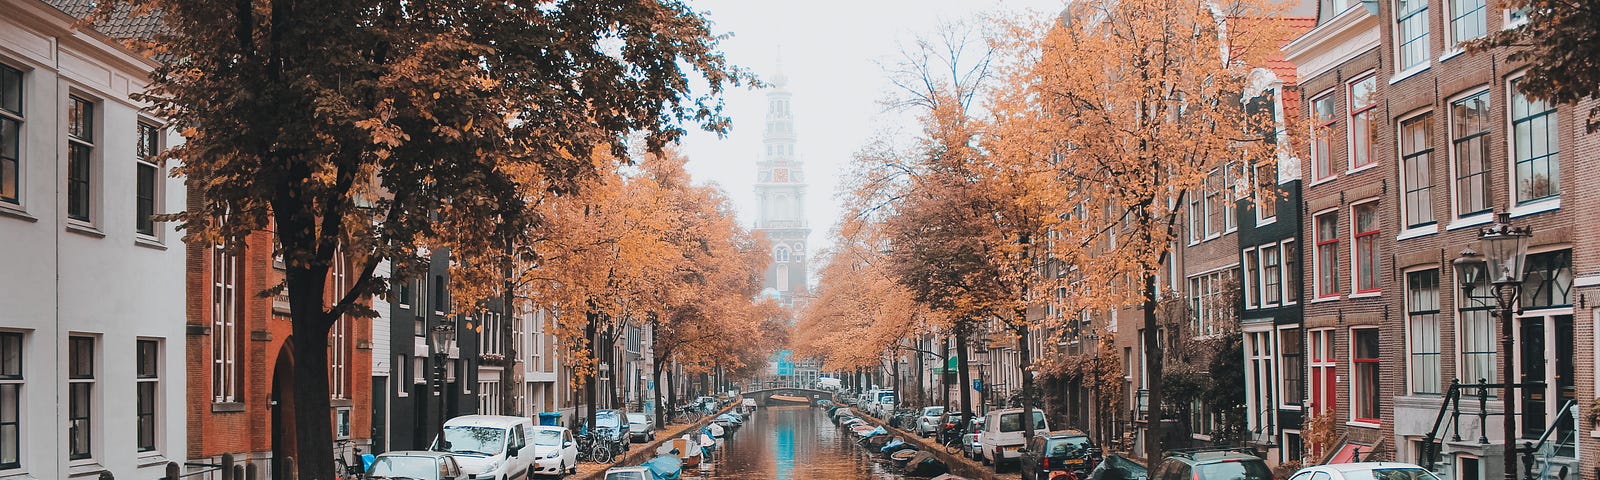 Amsterdam canals in autumn with orange and brown leaves on the trees and floating on the canal alongside small boats.